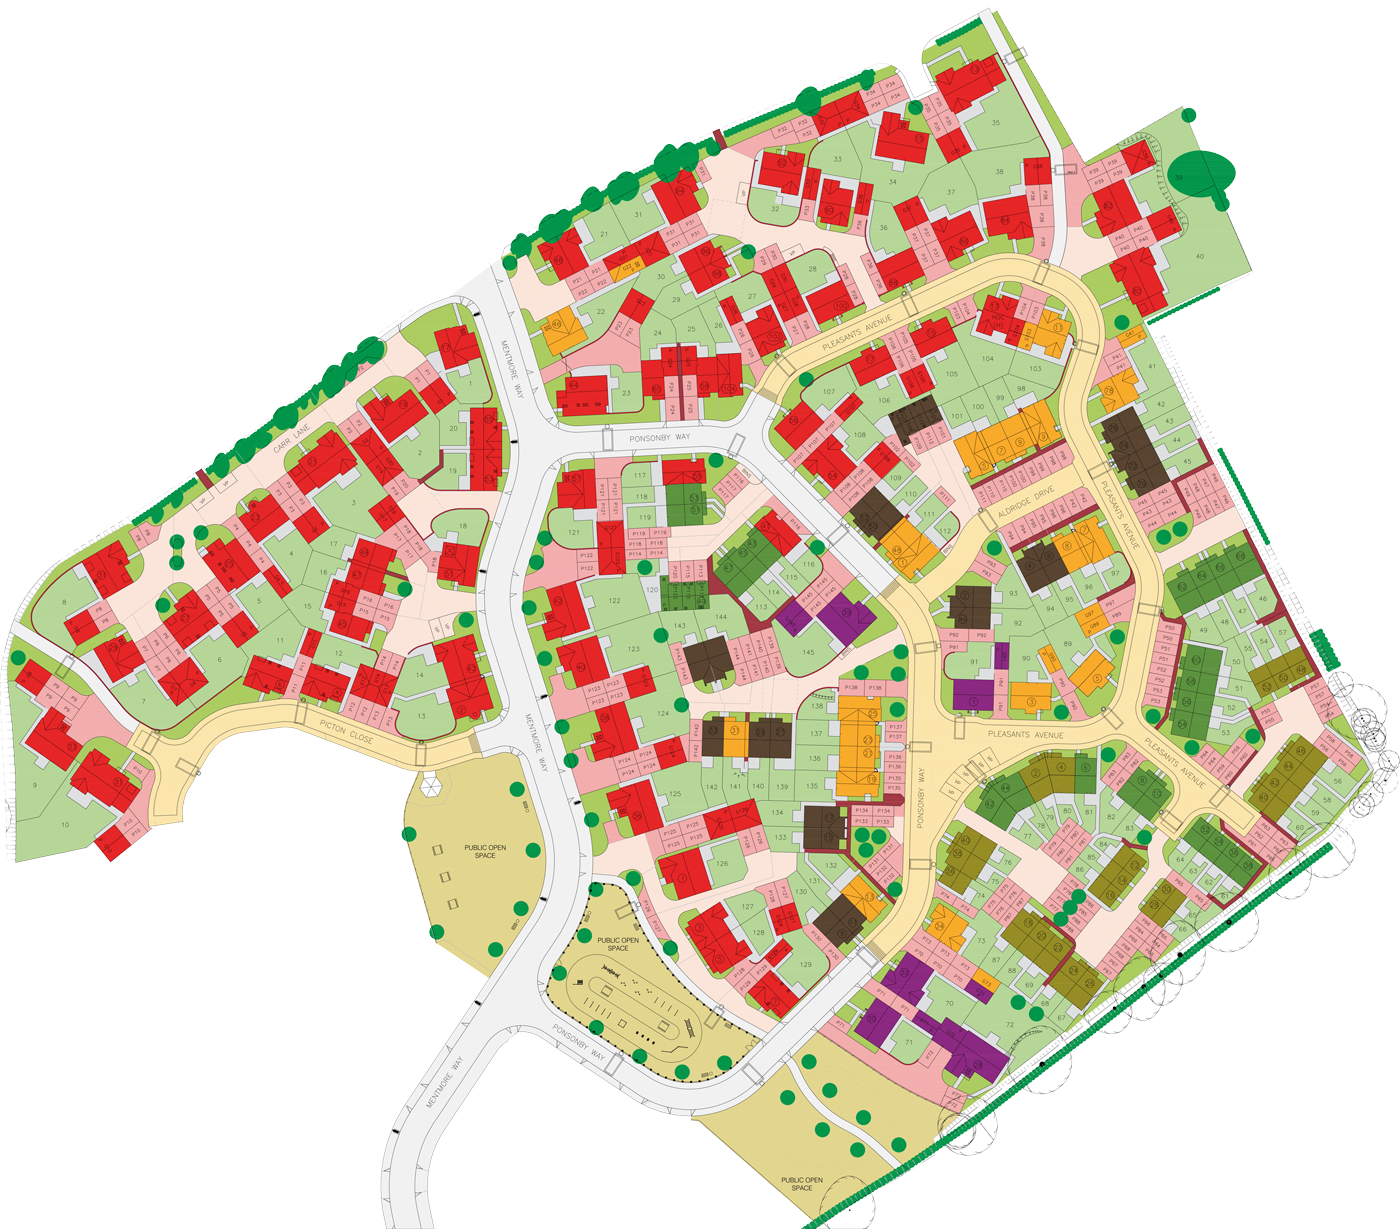 PNG format site plan for this housing development